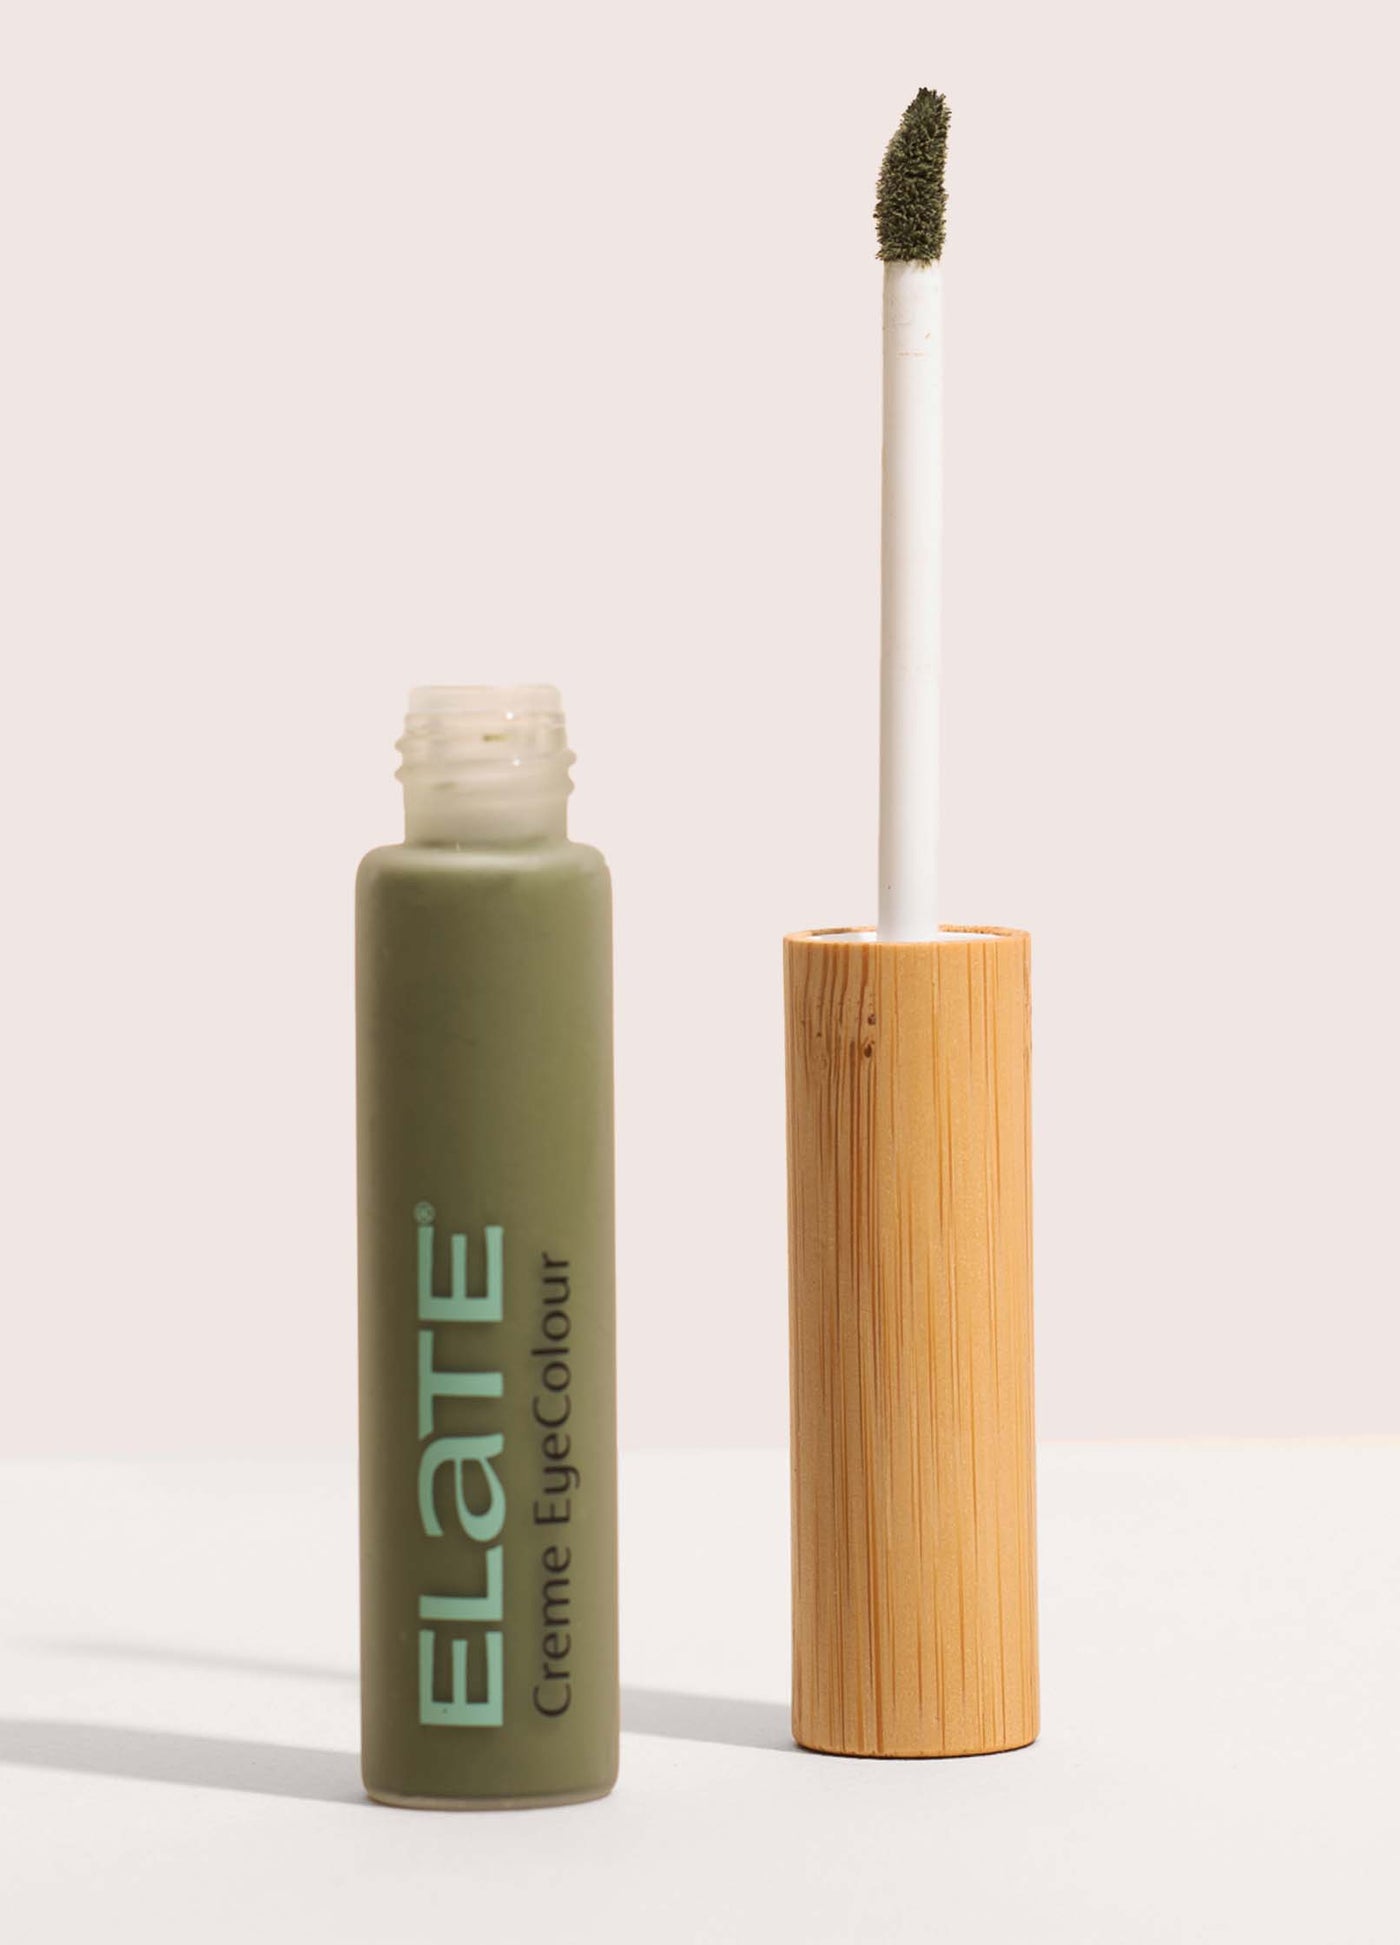 Elate Cosmetics Creme EyeColour open glass tube with bamboo applicator handle - curious